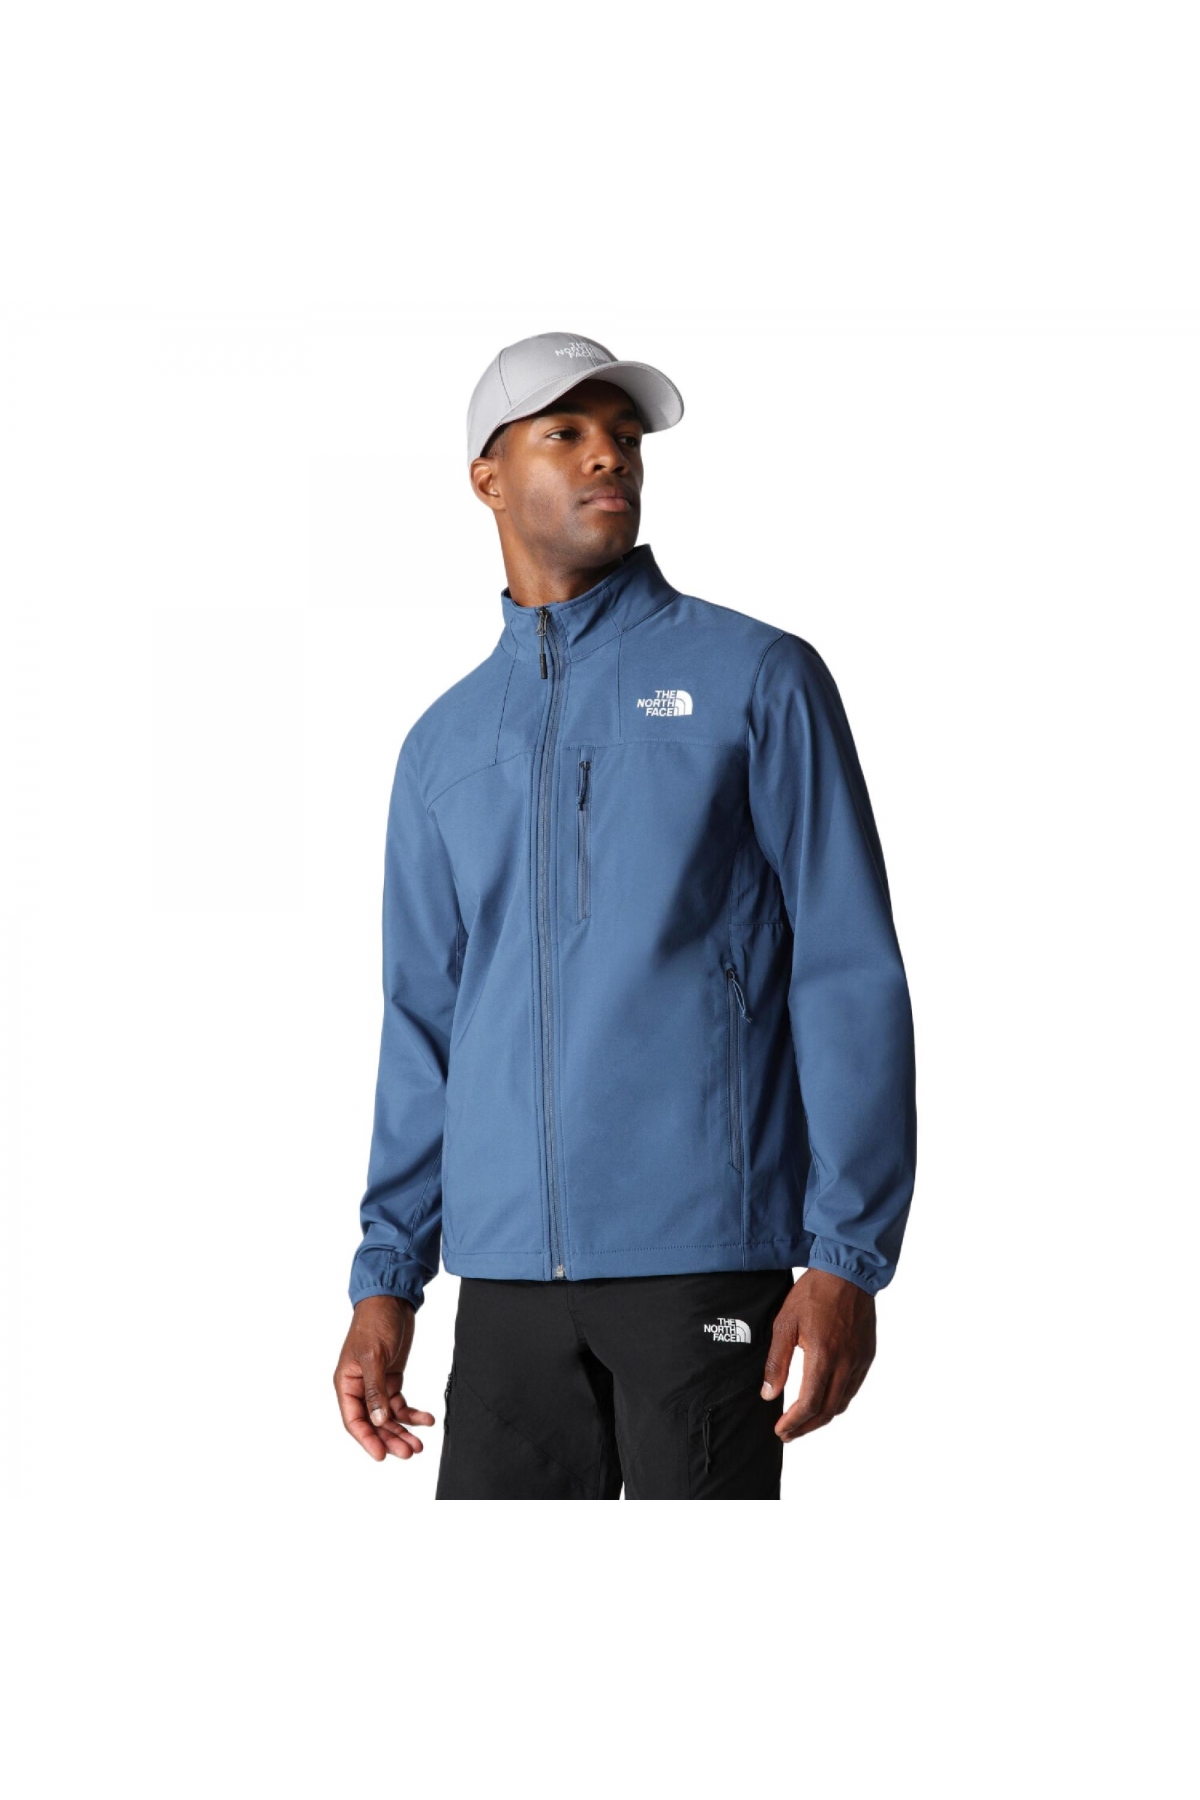 THE NORTH FACE M's Nimble JKT NF0A2TYG